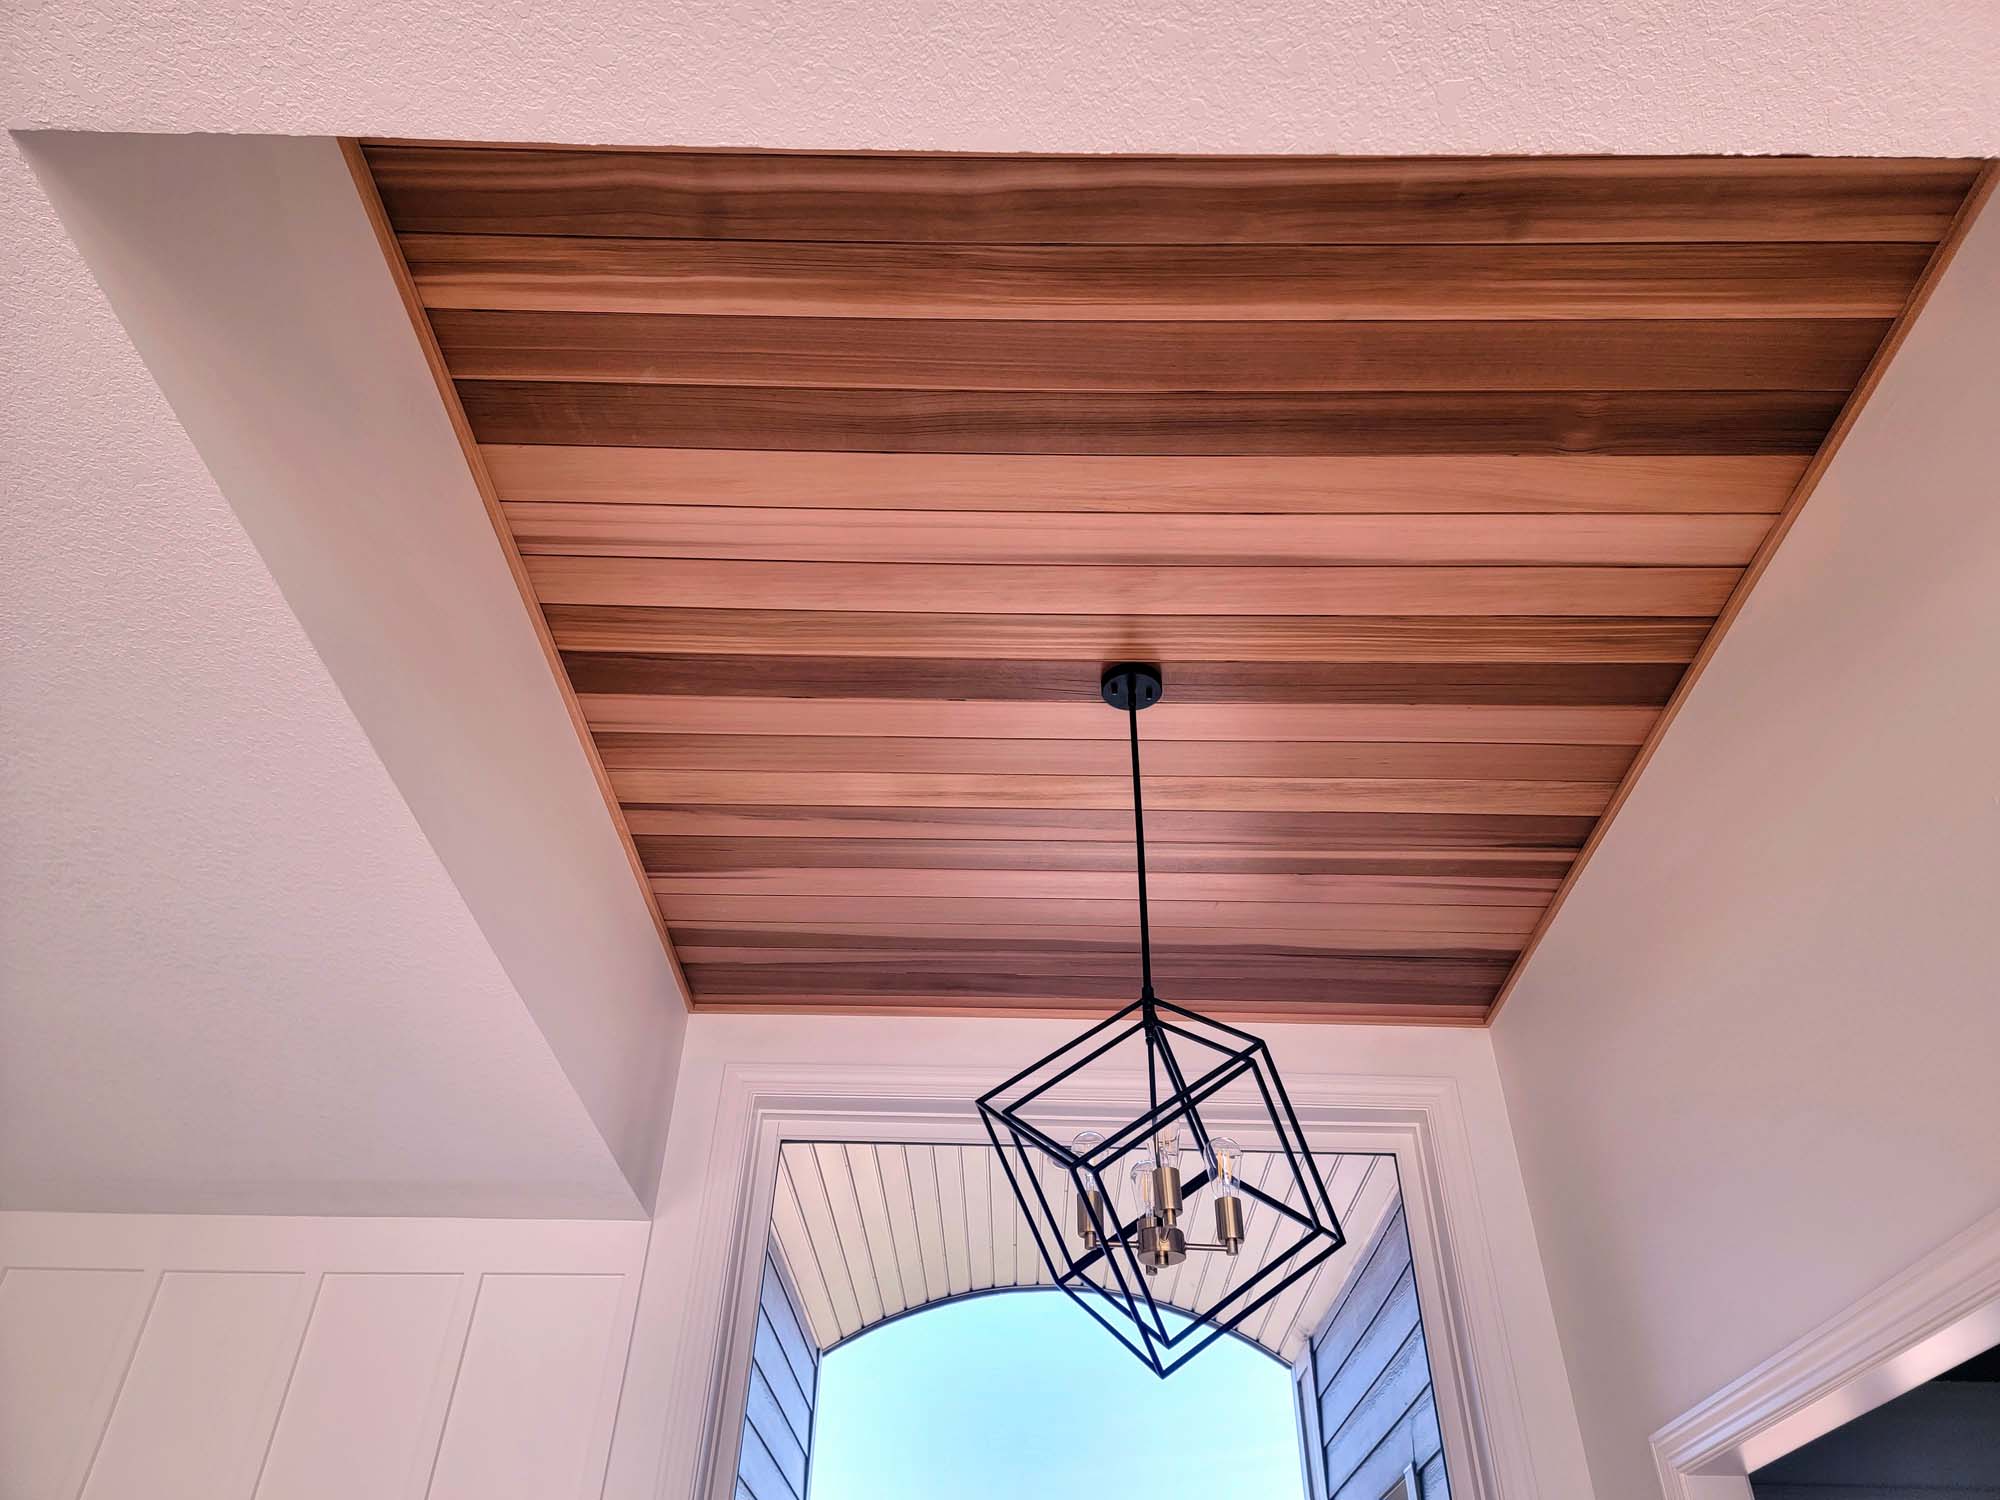 Foyer wood ceiling with modern light fixture